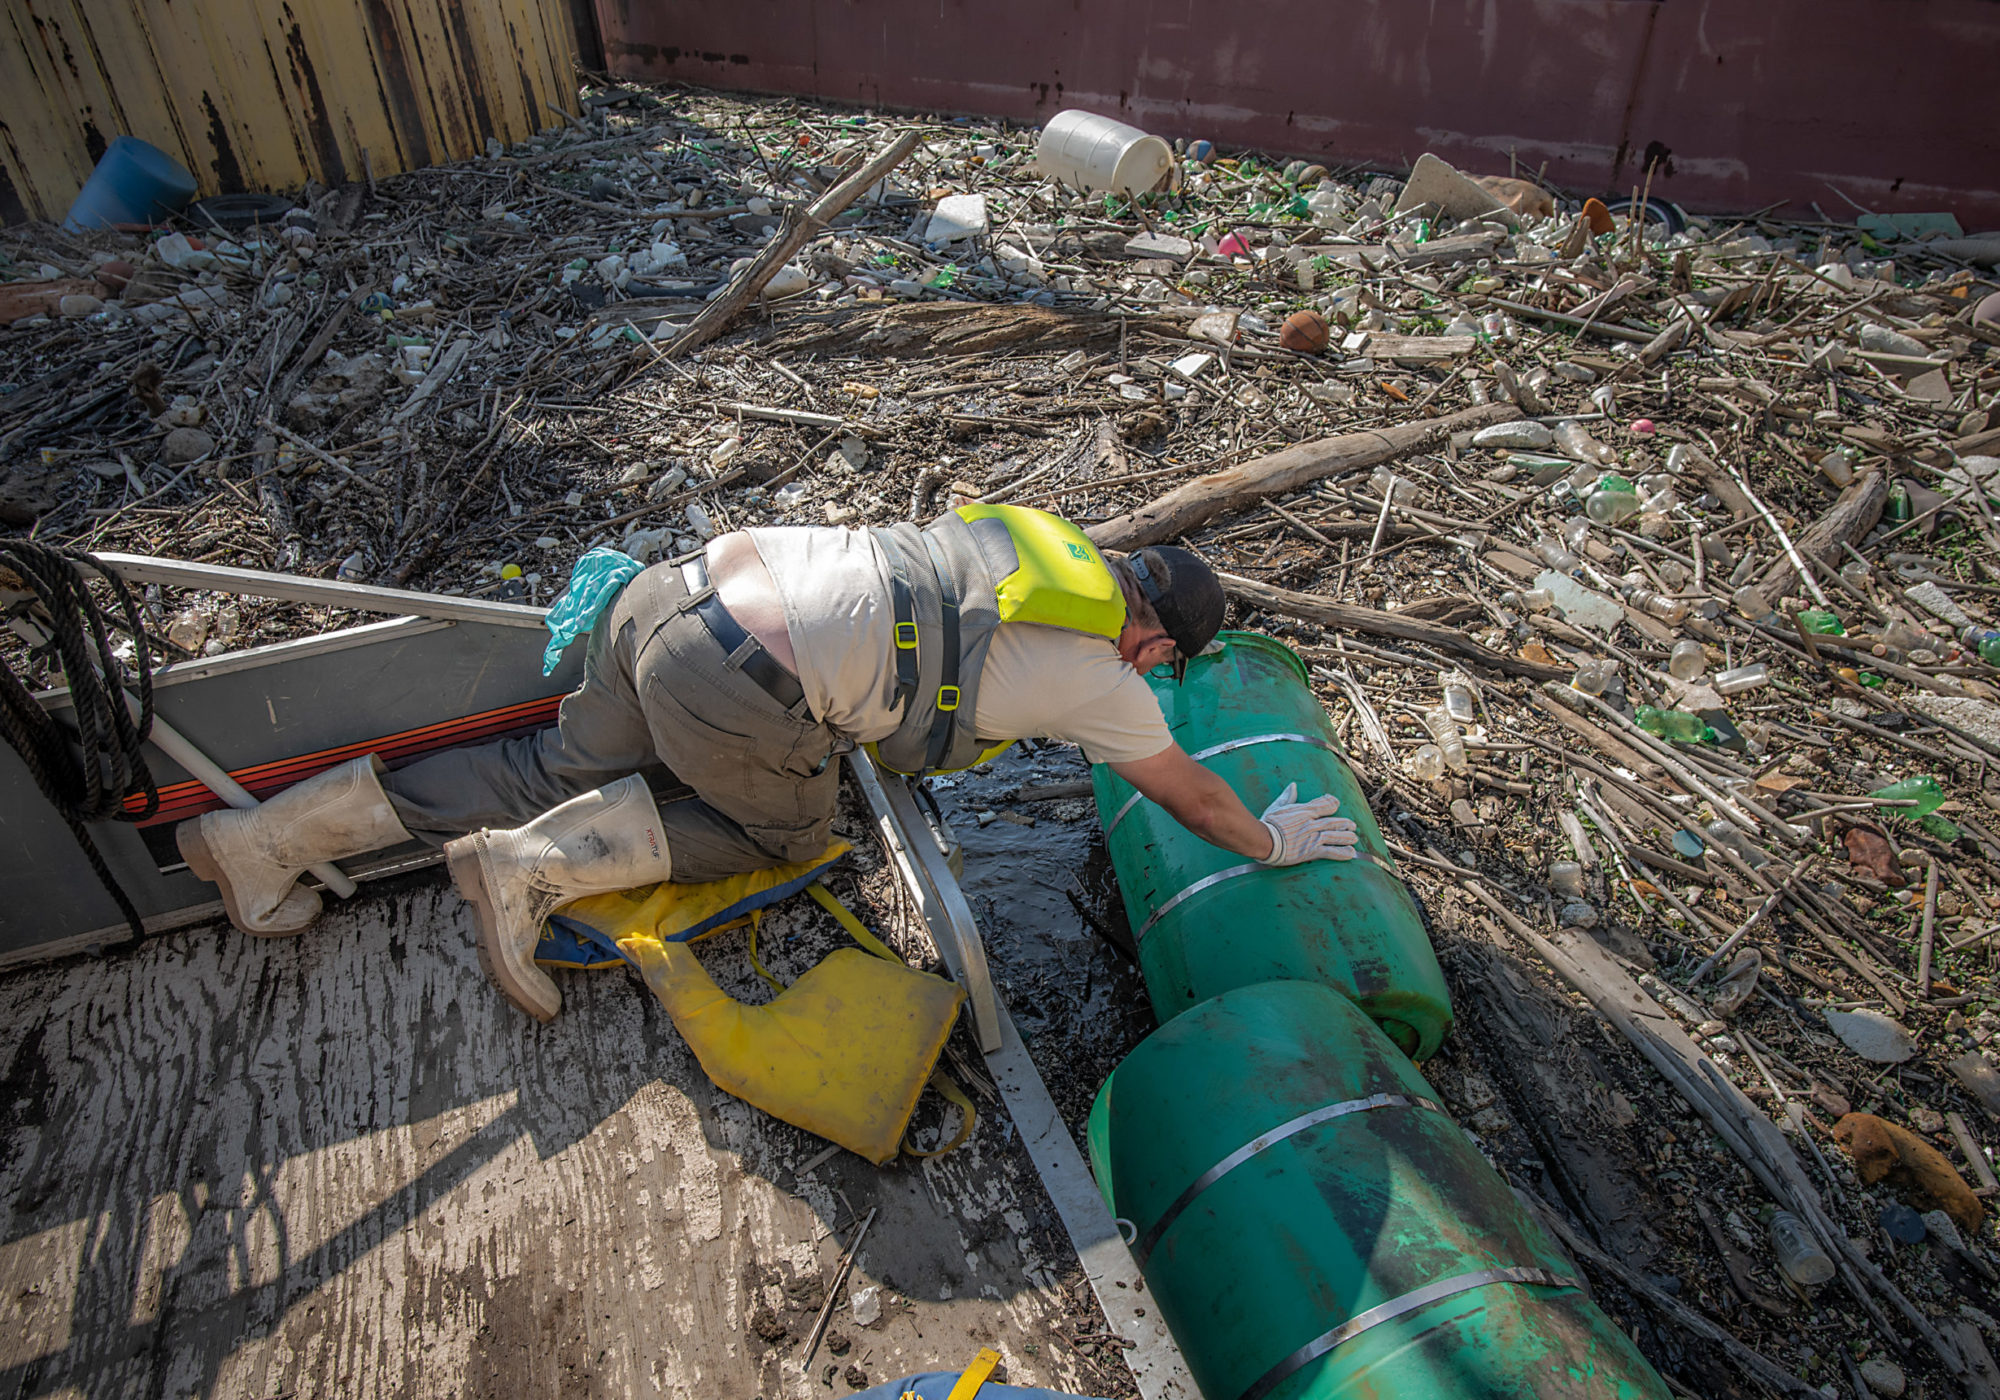 Evan Clark, a boat captain with the non-profit Allegheny CleanWays, tries to pull a plastic barrel from a debris island floating in the Monongahela River. CREDIT: Teake Zuidema/Nexus Media News